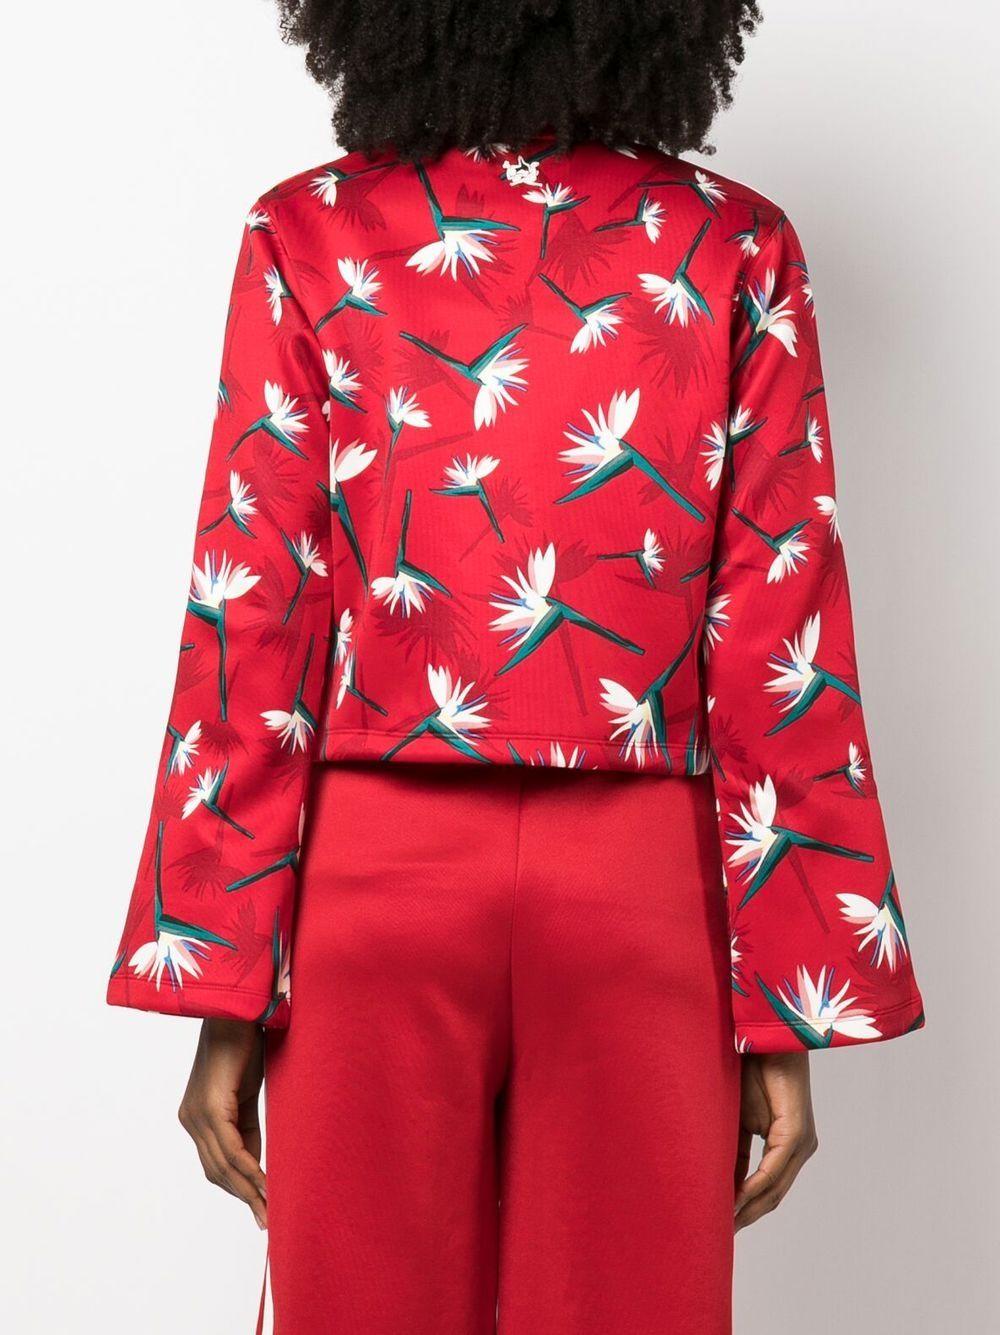 adidas Floral-print Zip-up Jacket in Red | Lyst